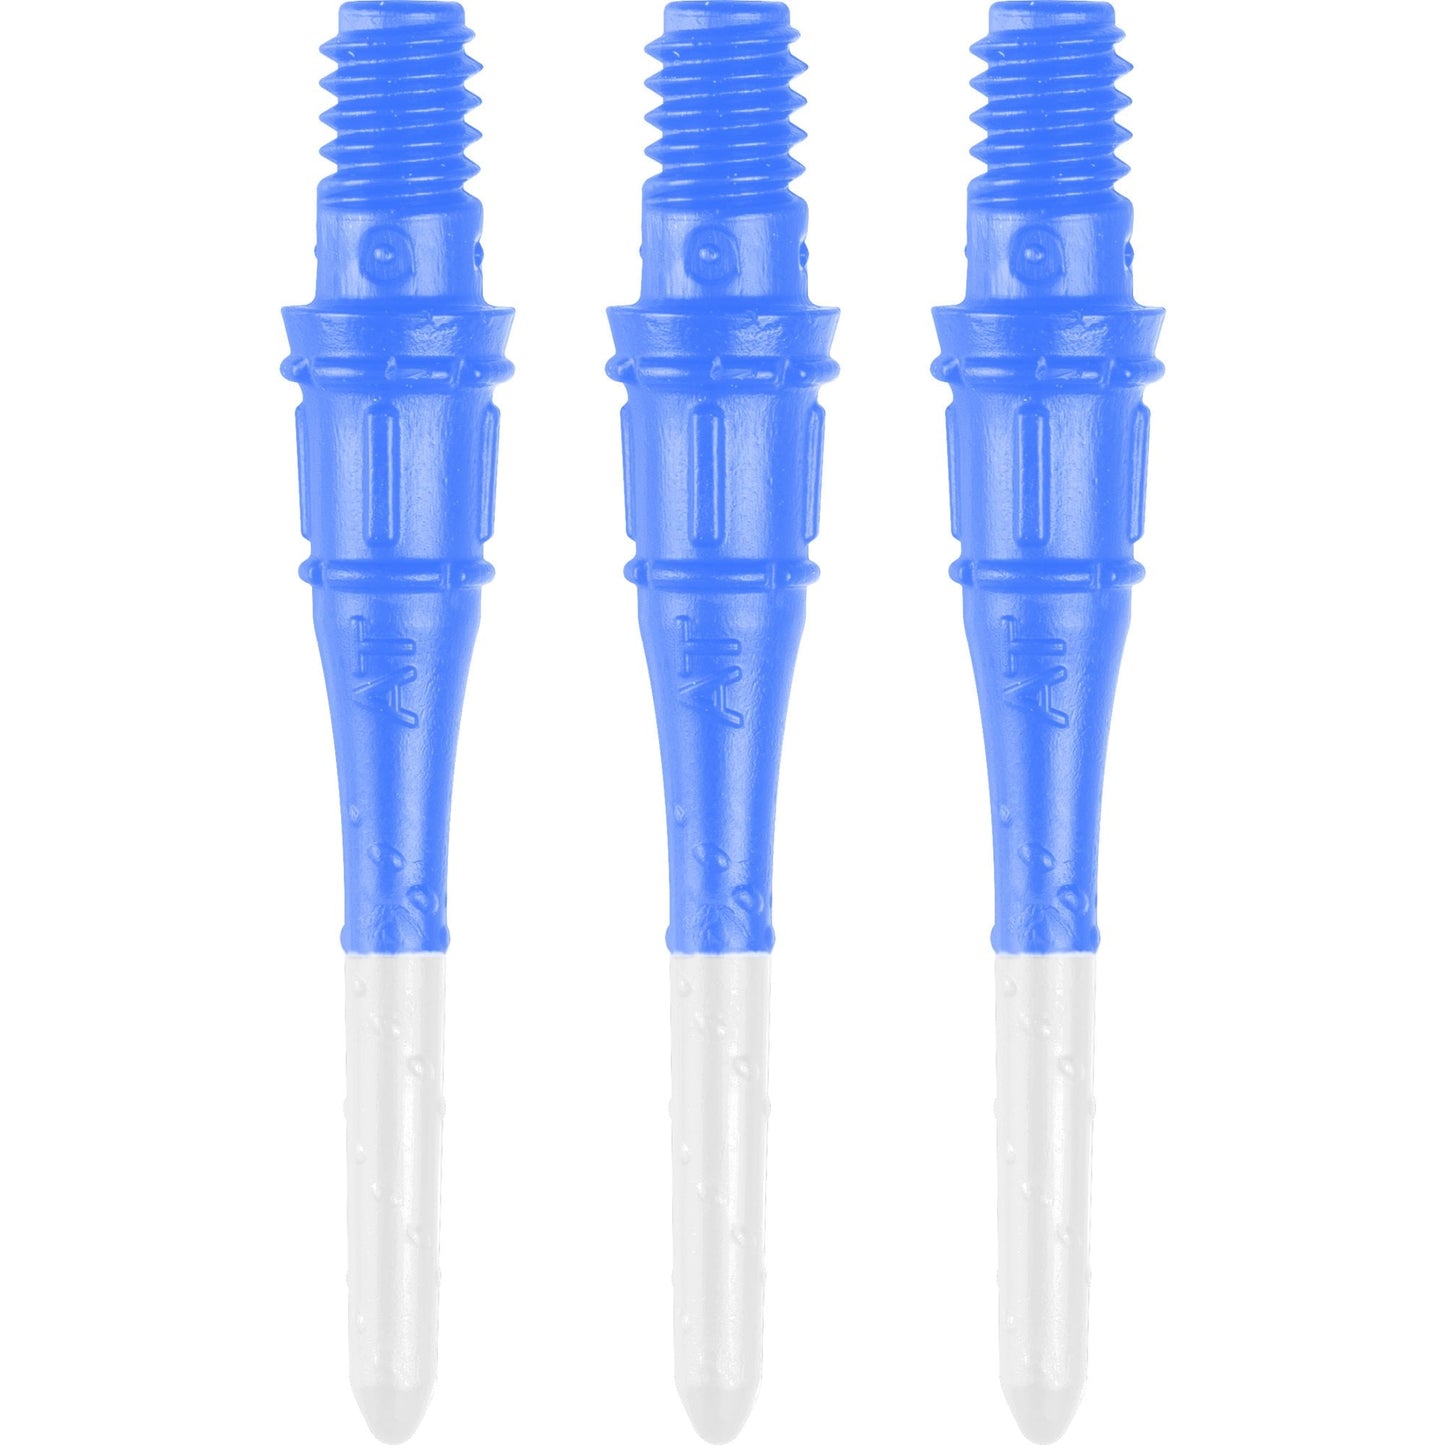 L-Style Premium Lippoints Two Tone - Spare Tips - Lip Points - 2ba - Pack 30 Blue